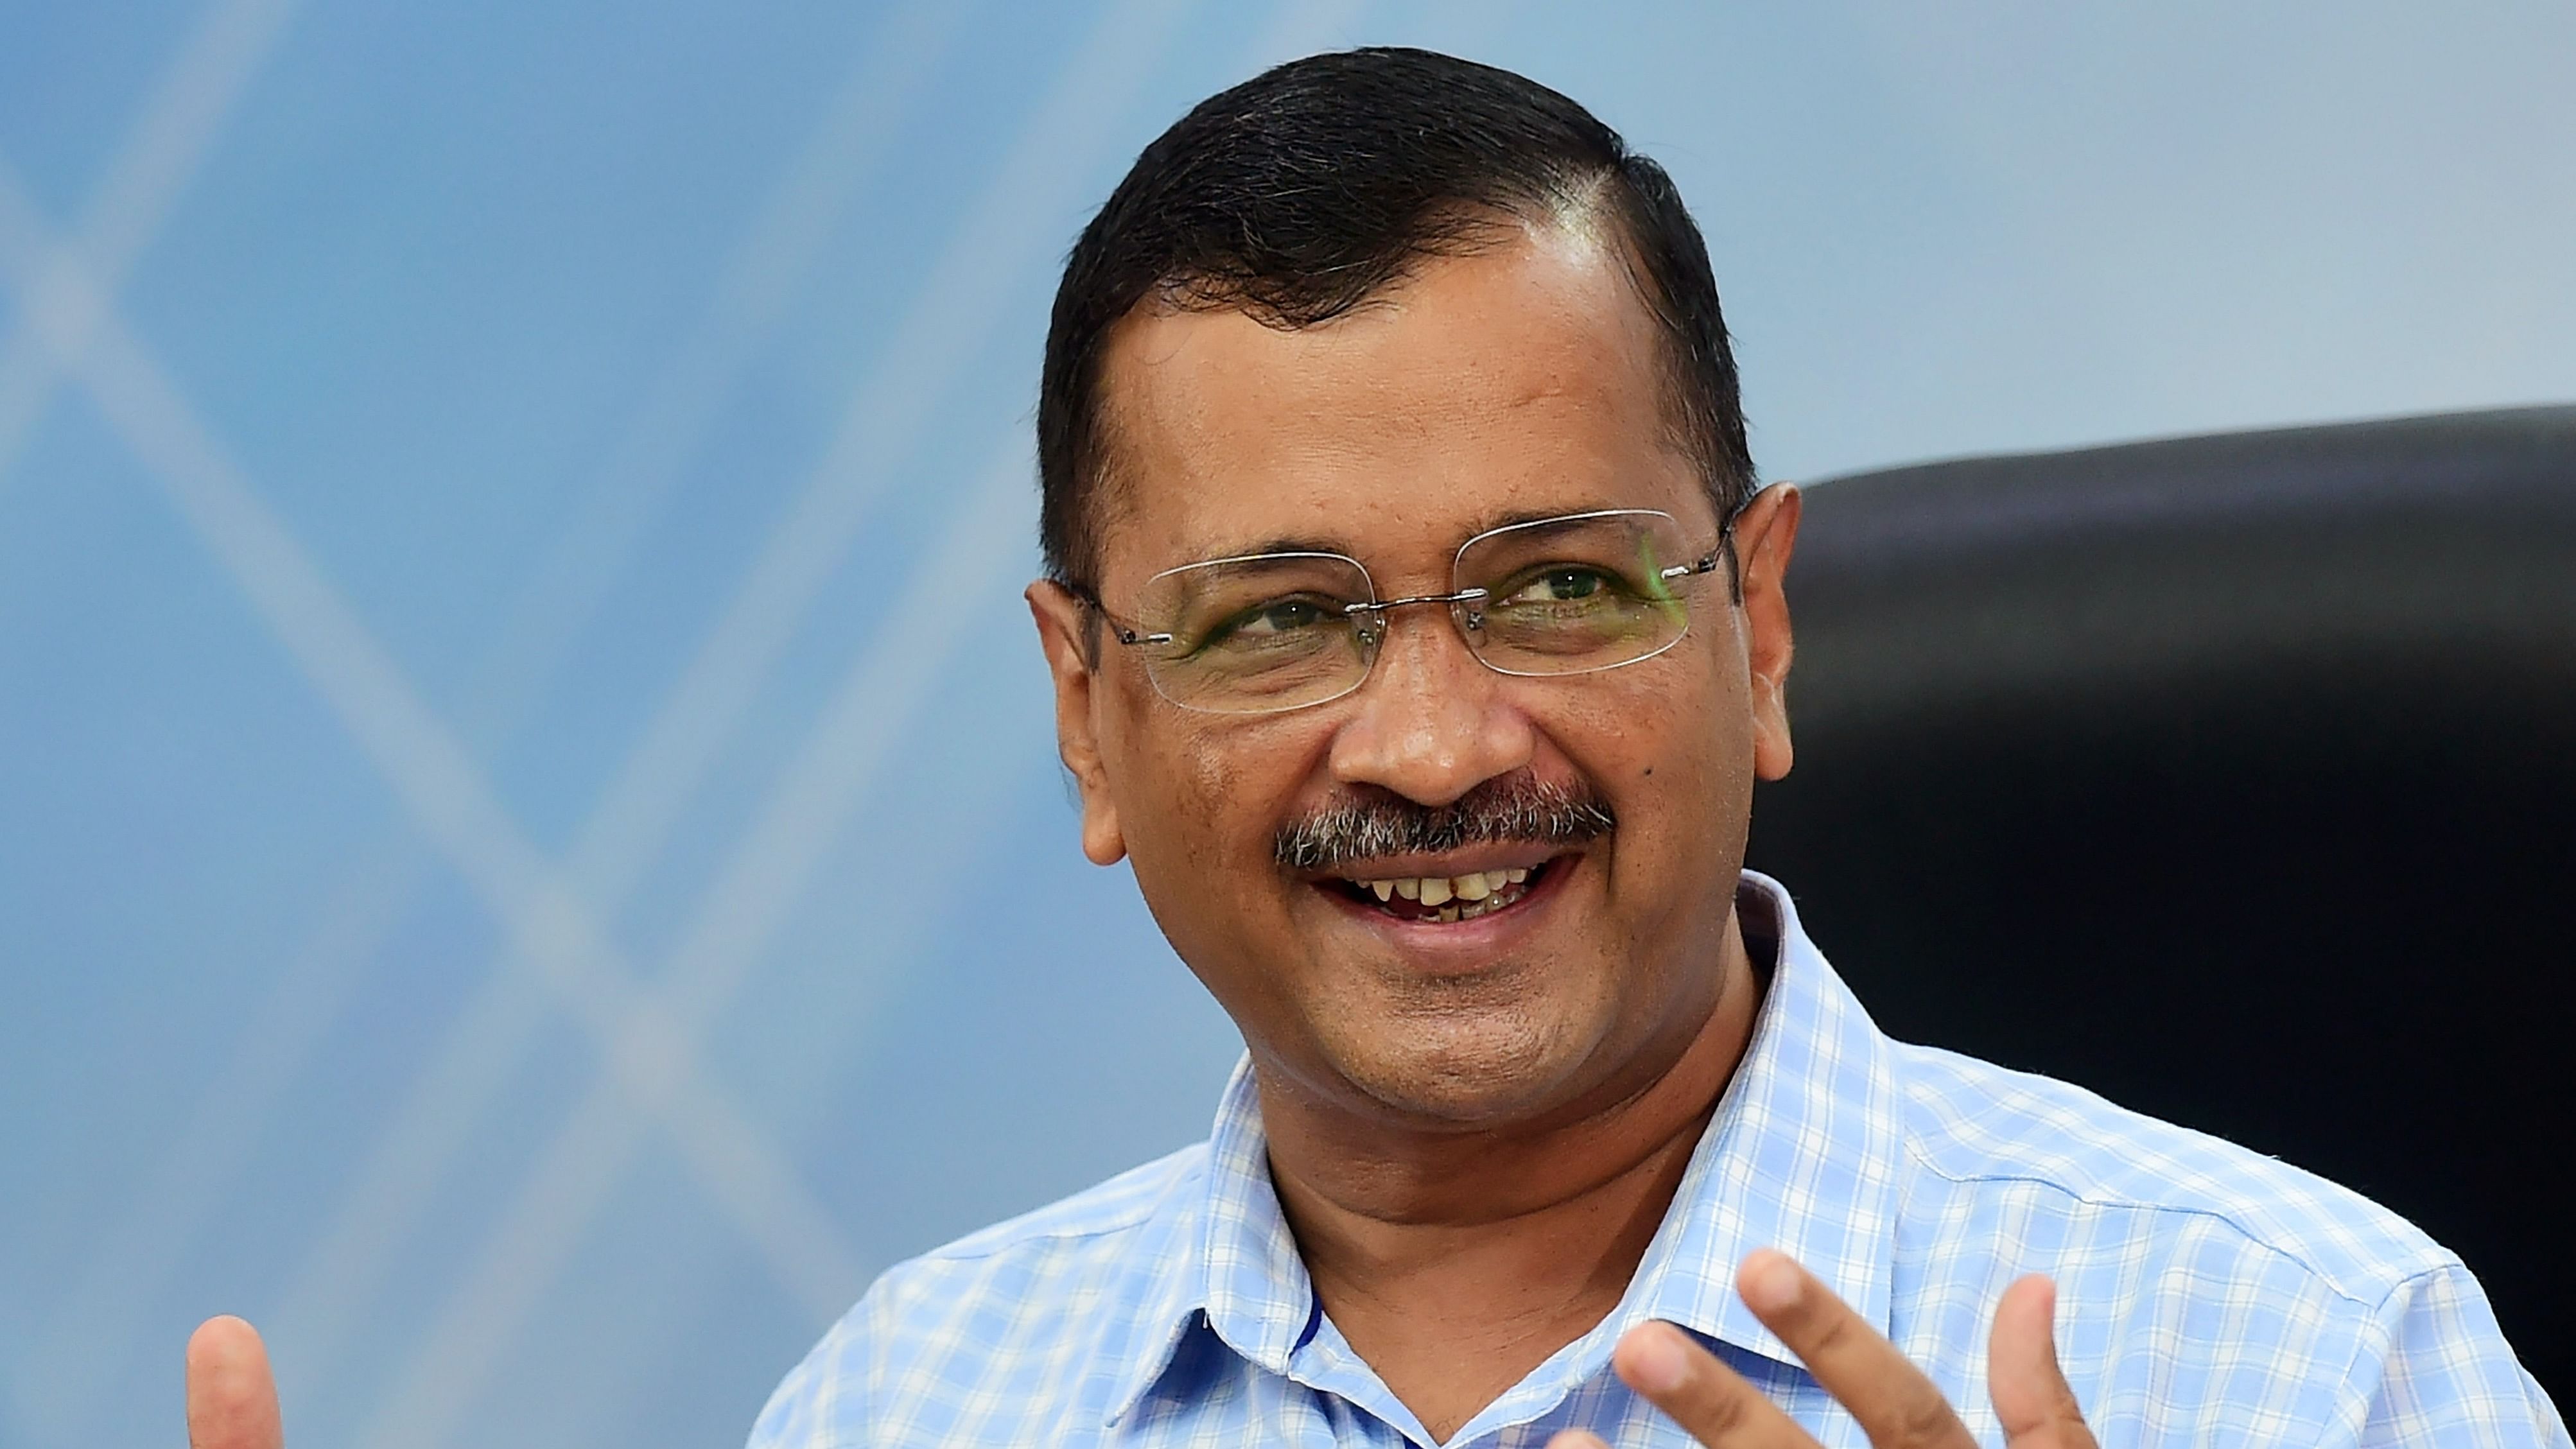 The AAP leaders had alleged irregularities related to demonetised currency when Saxena was the chairman of Khadi and Village Industries Commission. Credit: PTI Photo